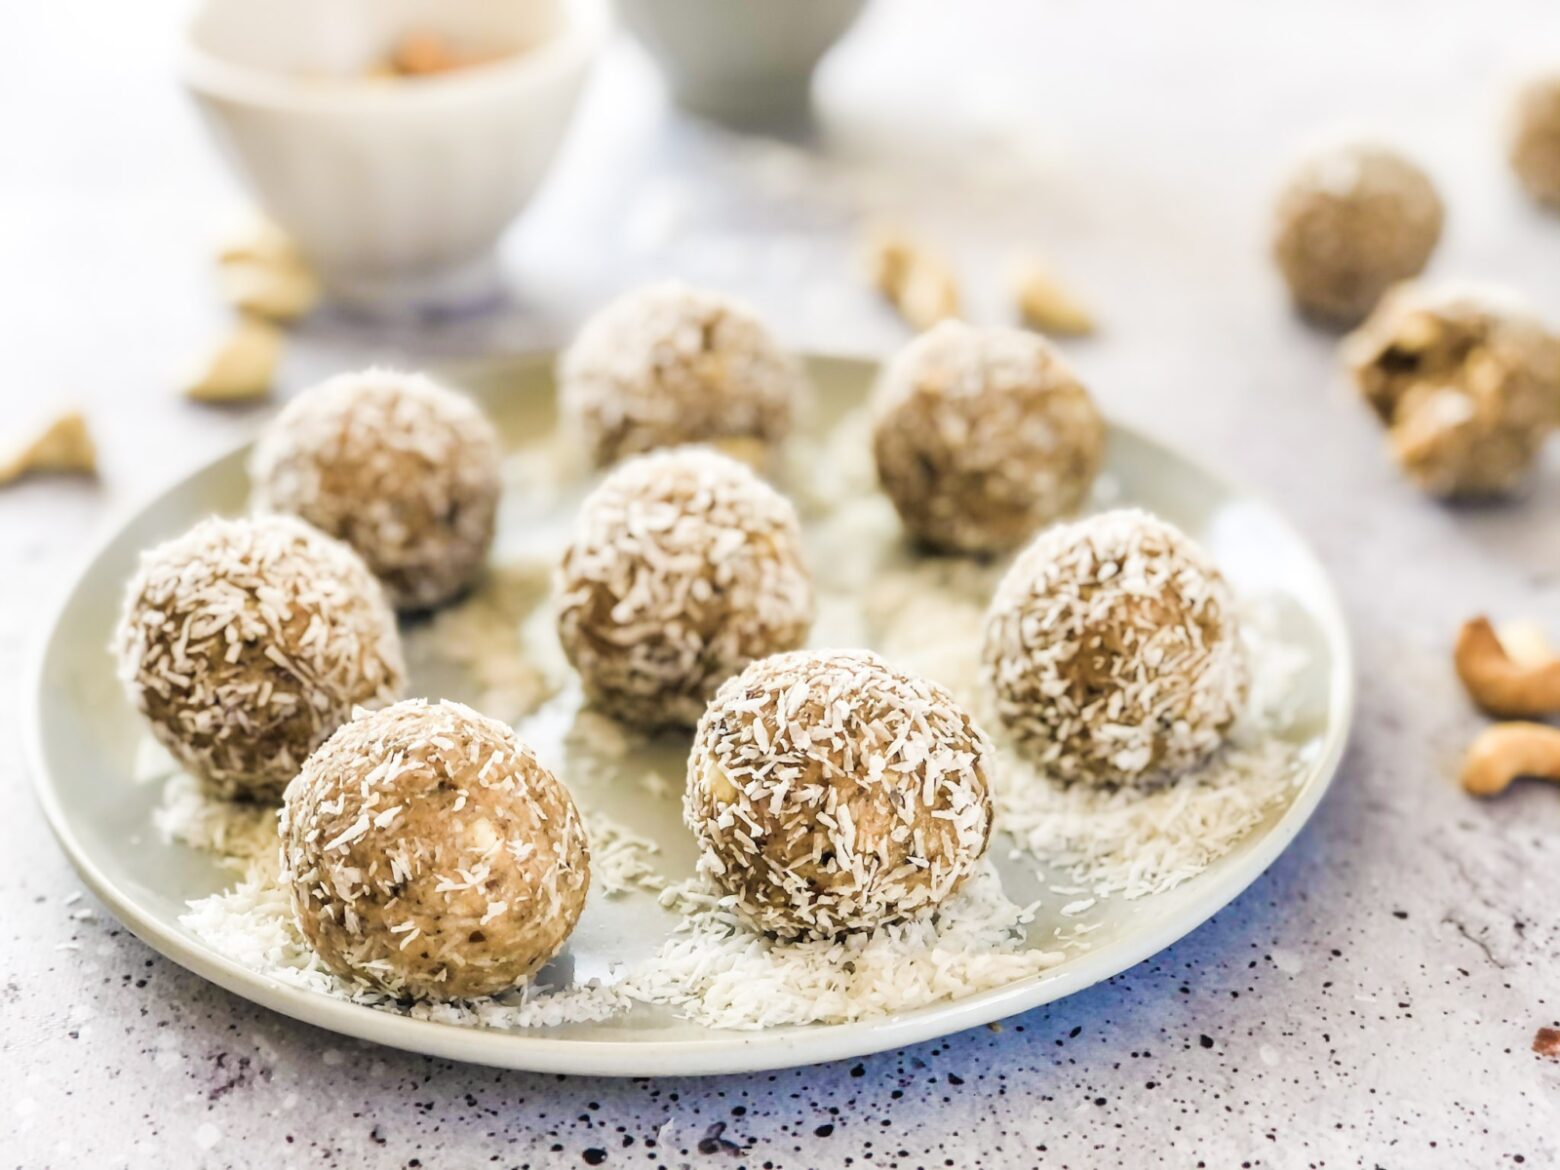 A white plate of coconut and cashew butter energy balls, garnished with shredded coconut surrounded by out-of-focus small bowls and ingredients.